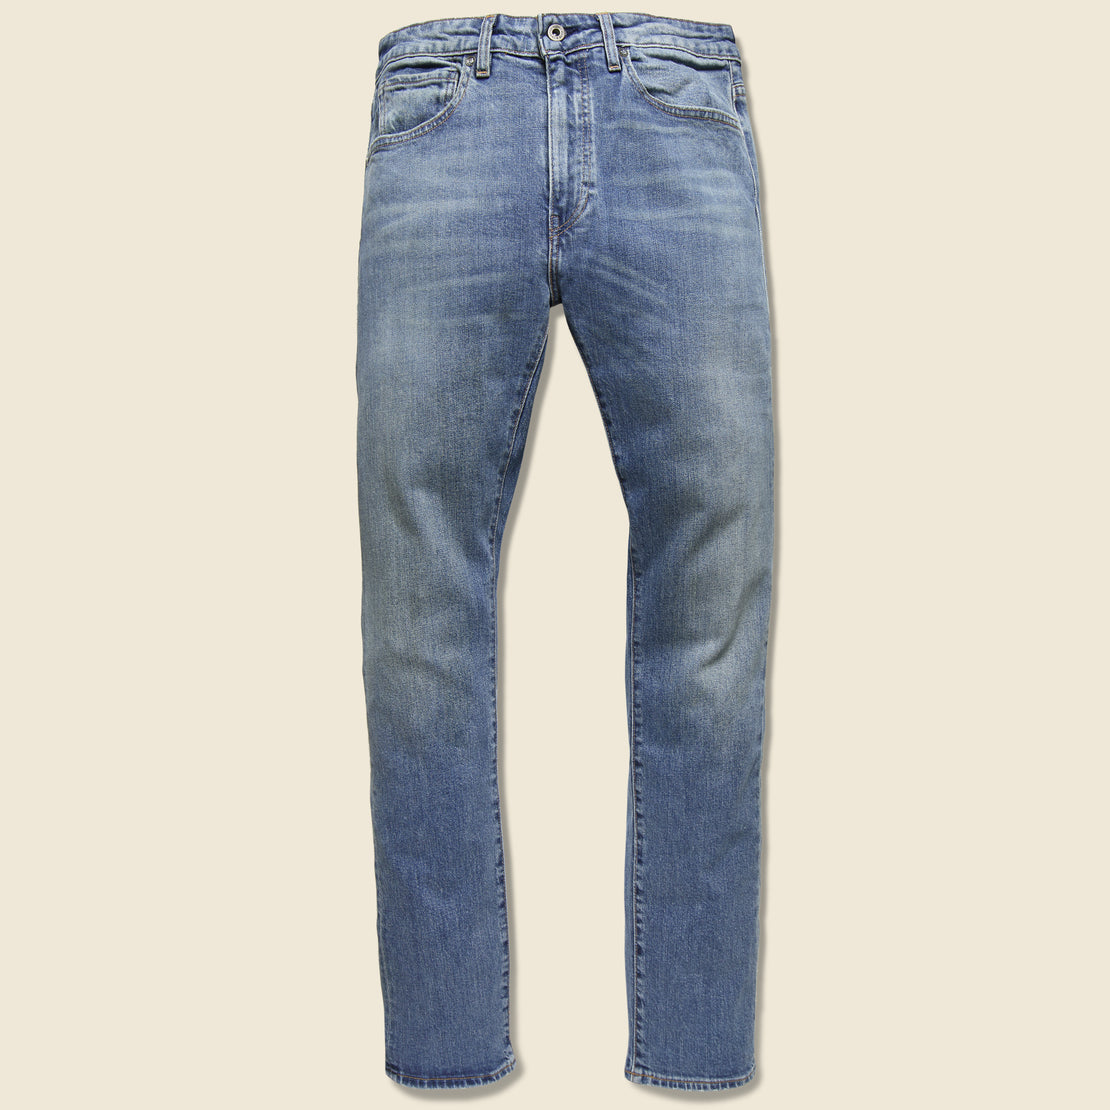 Levis Made & Crafted Tack Slim Jean - Mikyo Wash